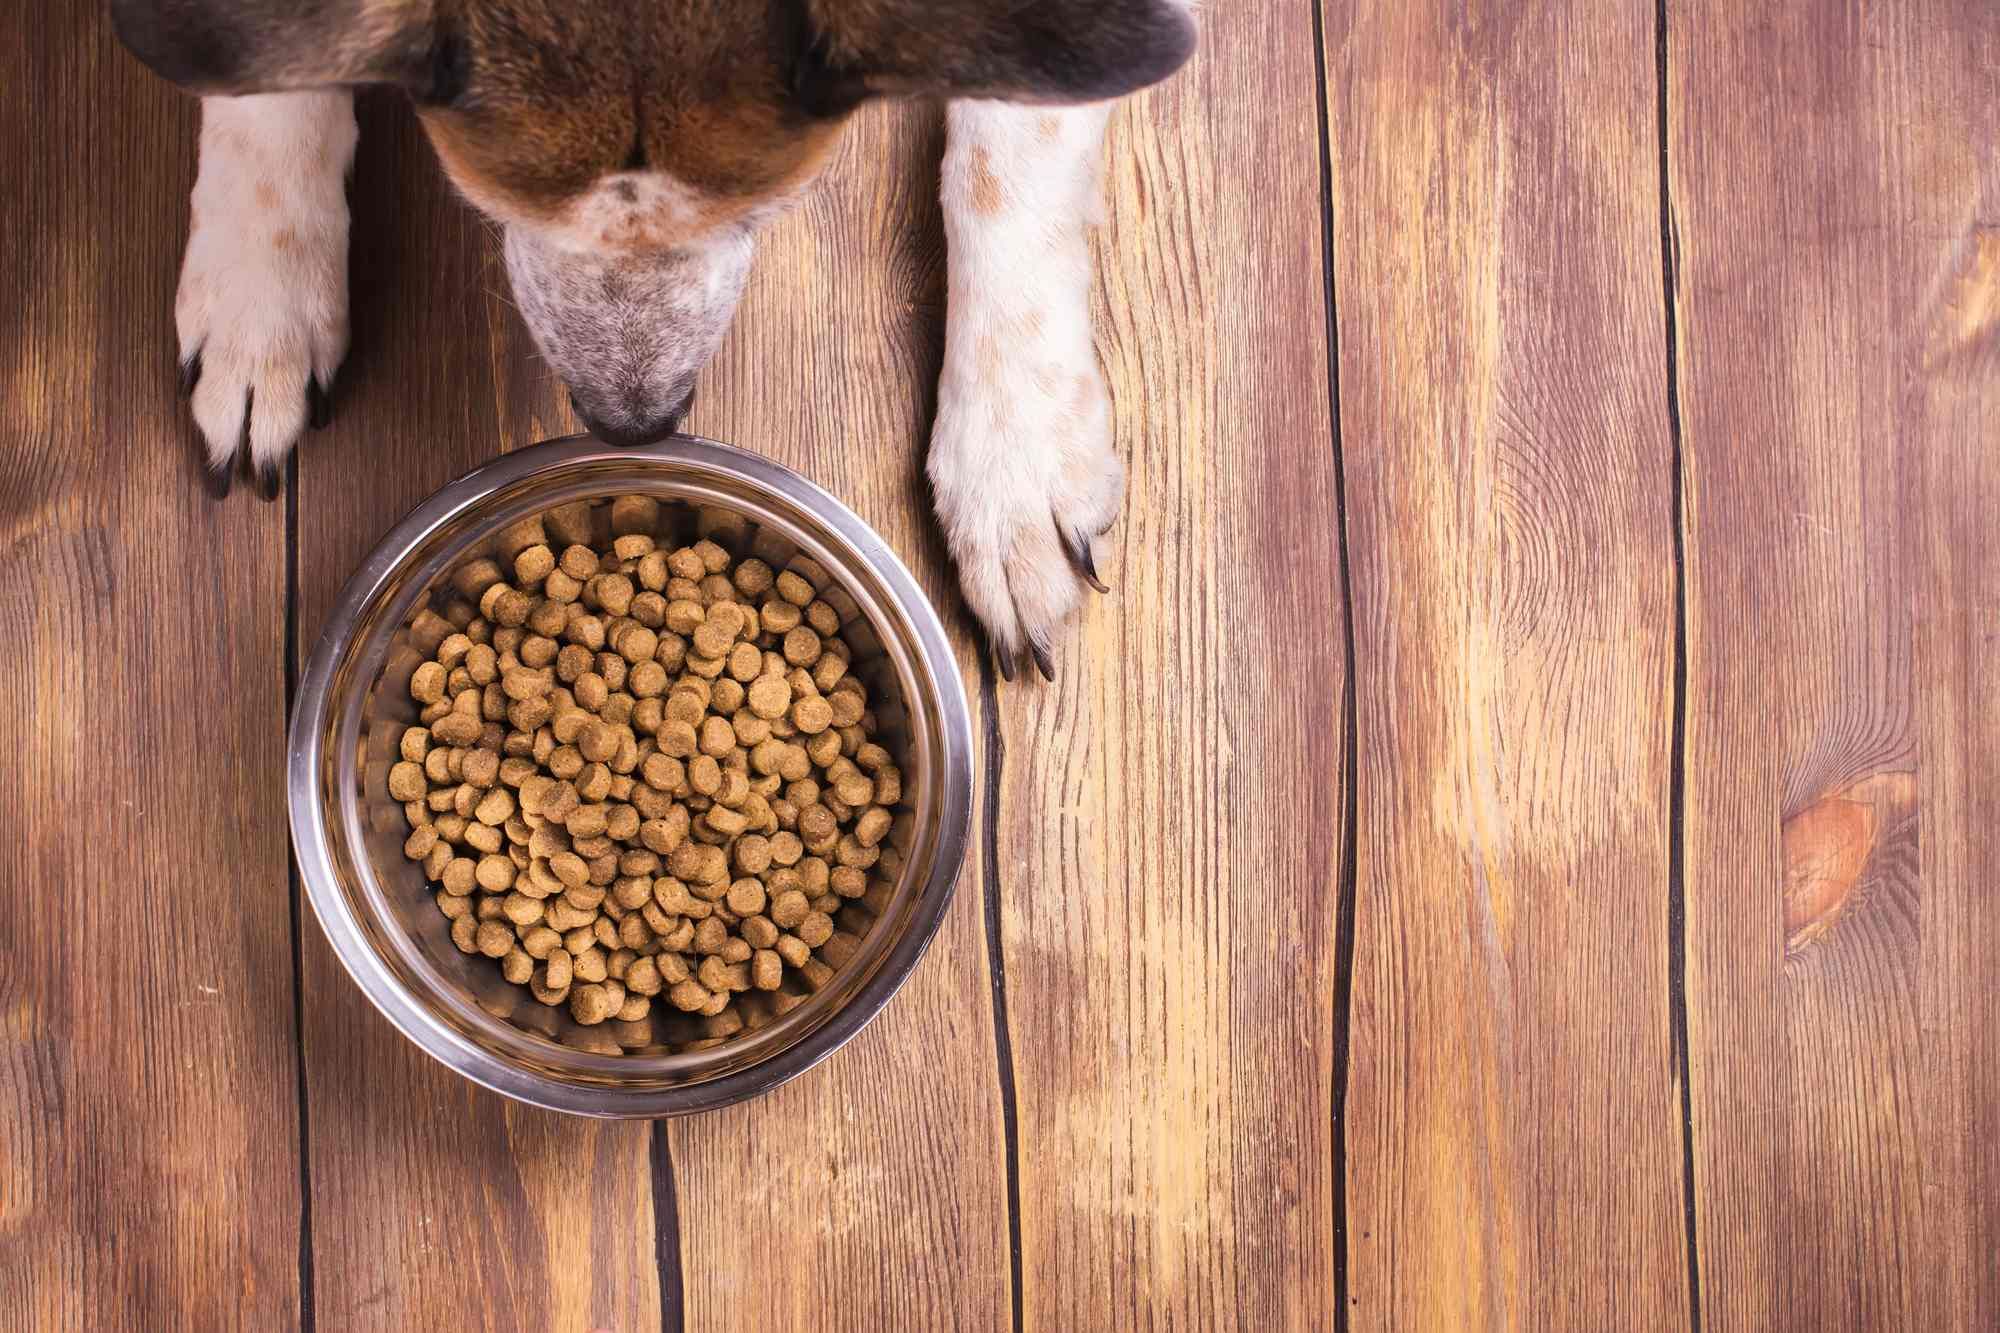 Sportsmix recall has been made for the pet food.